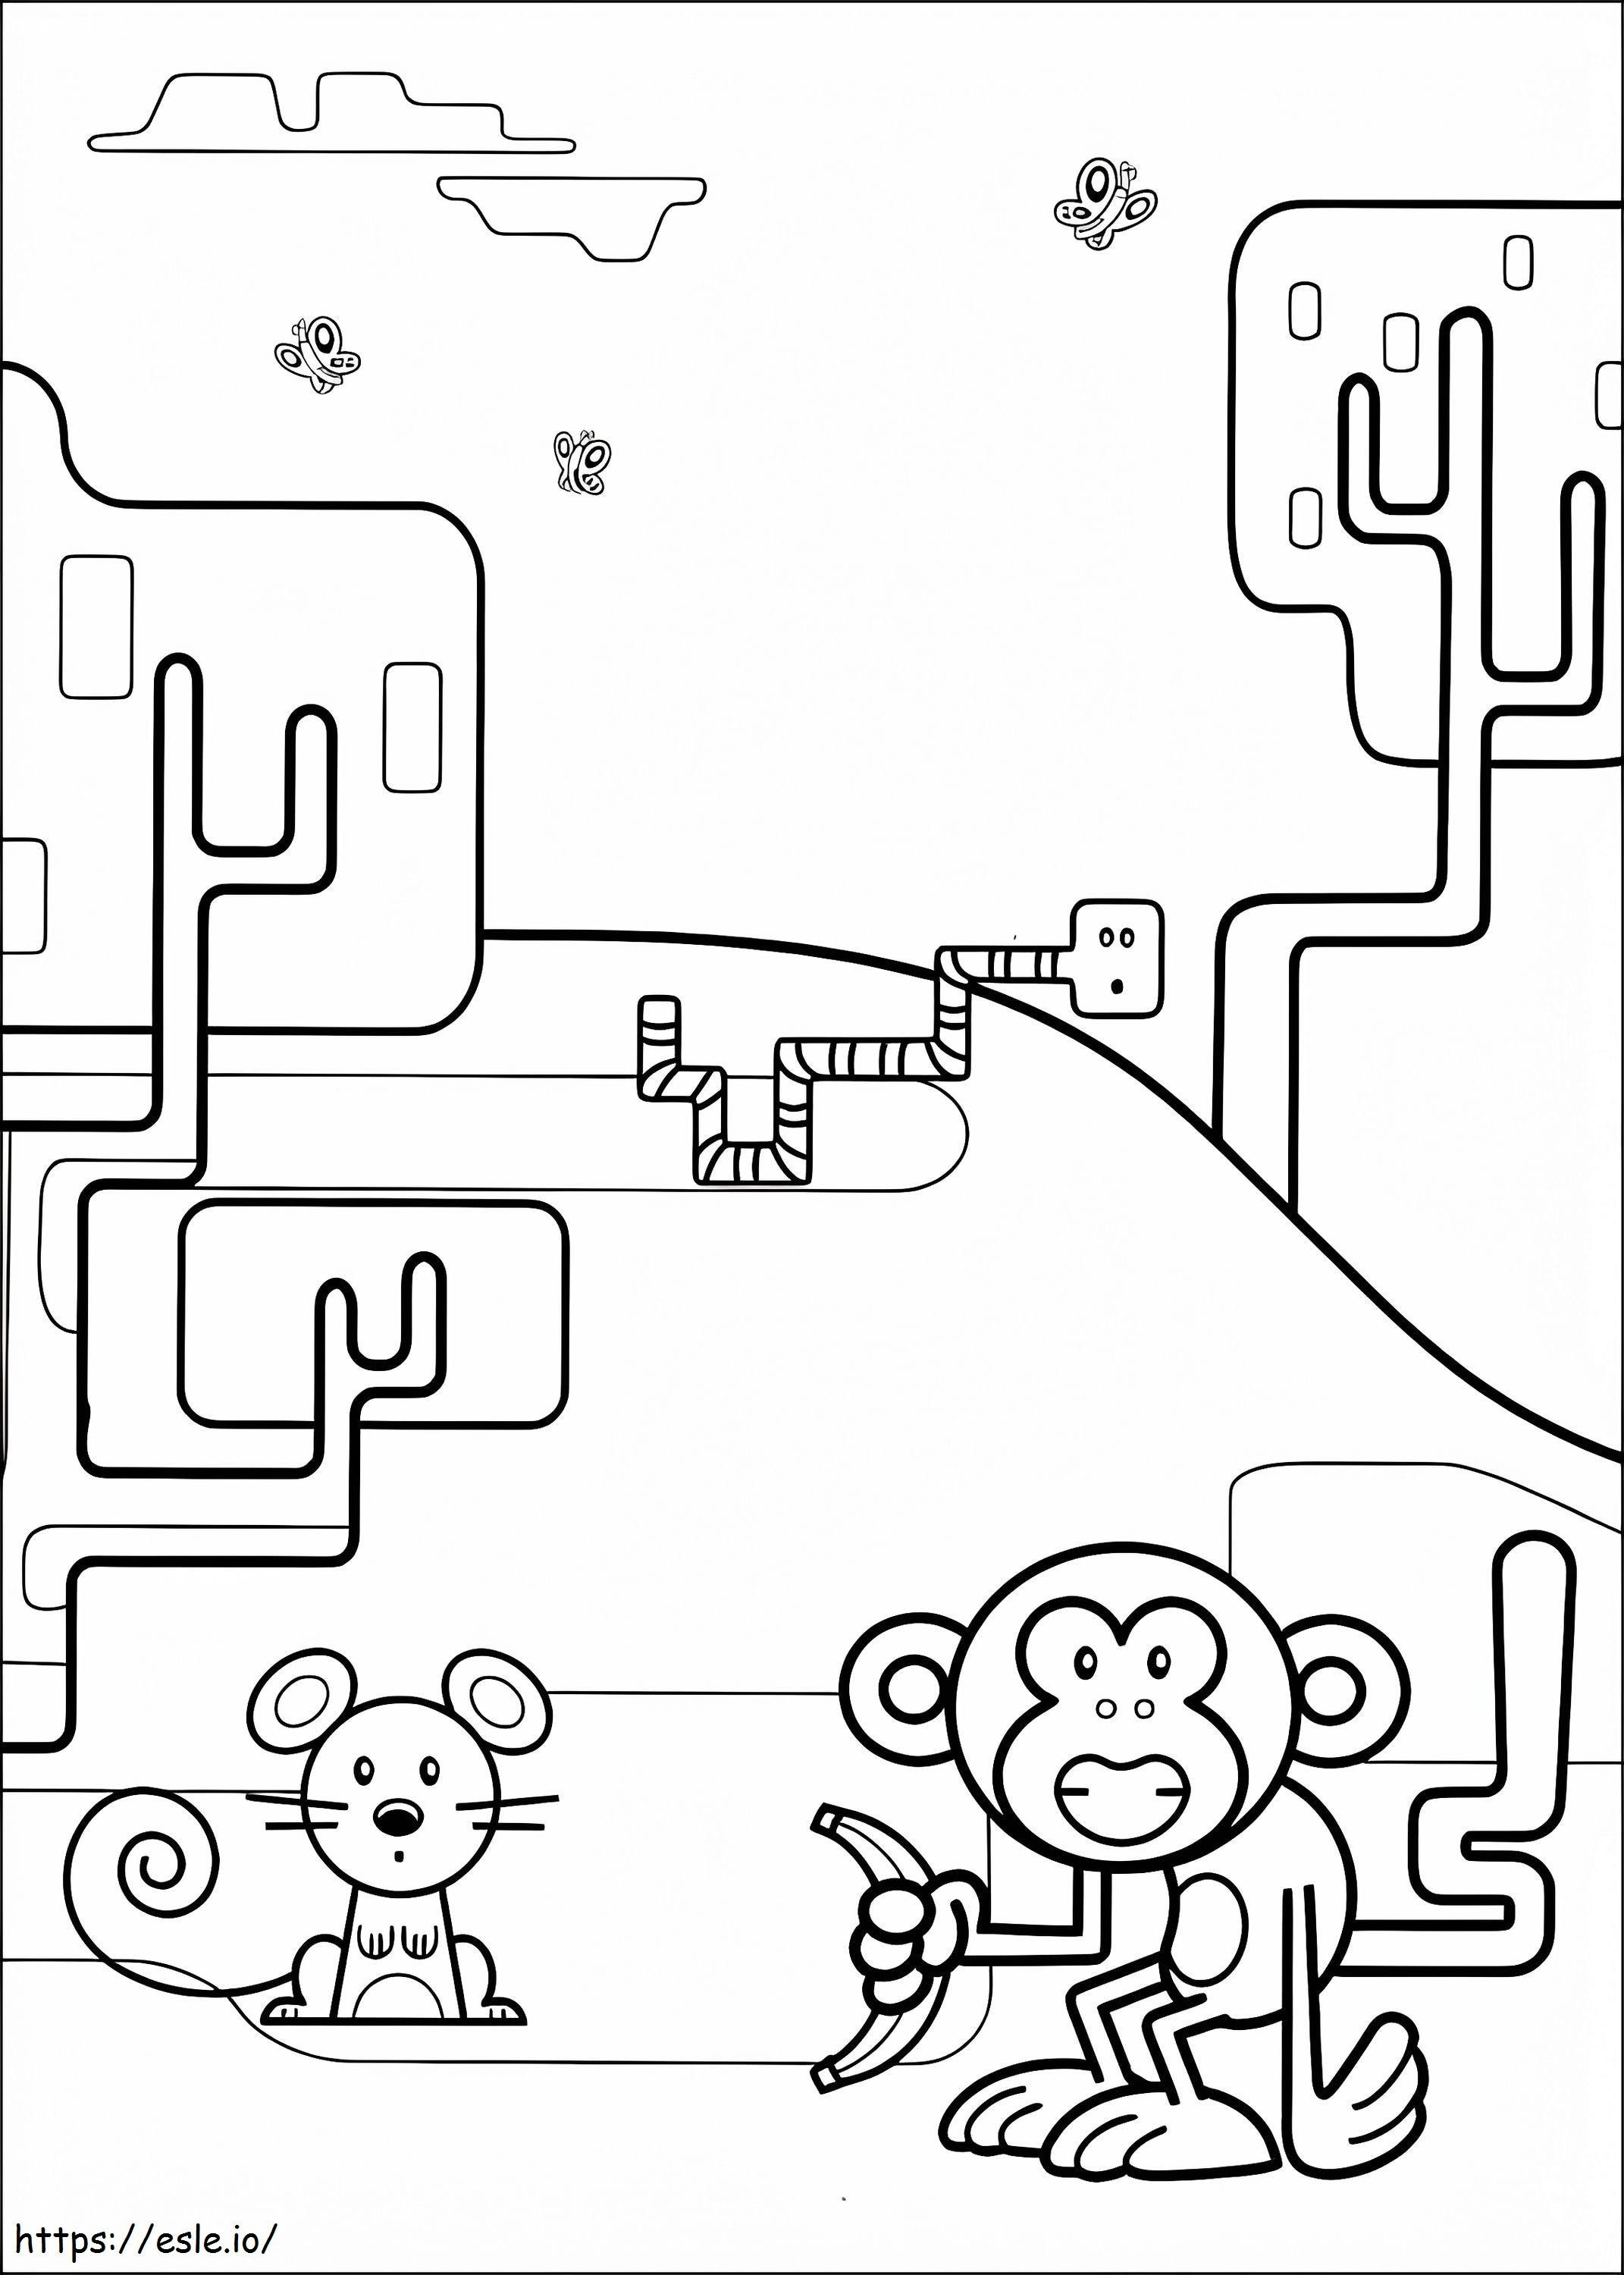 Printable Wow Wow Wubbzy coloring page